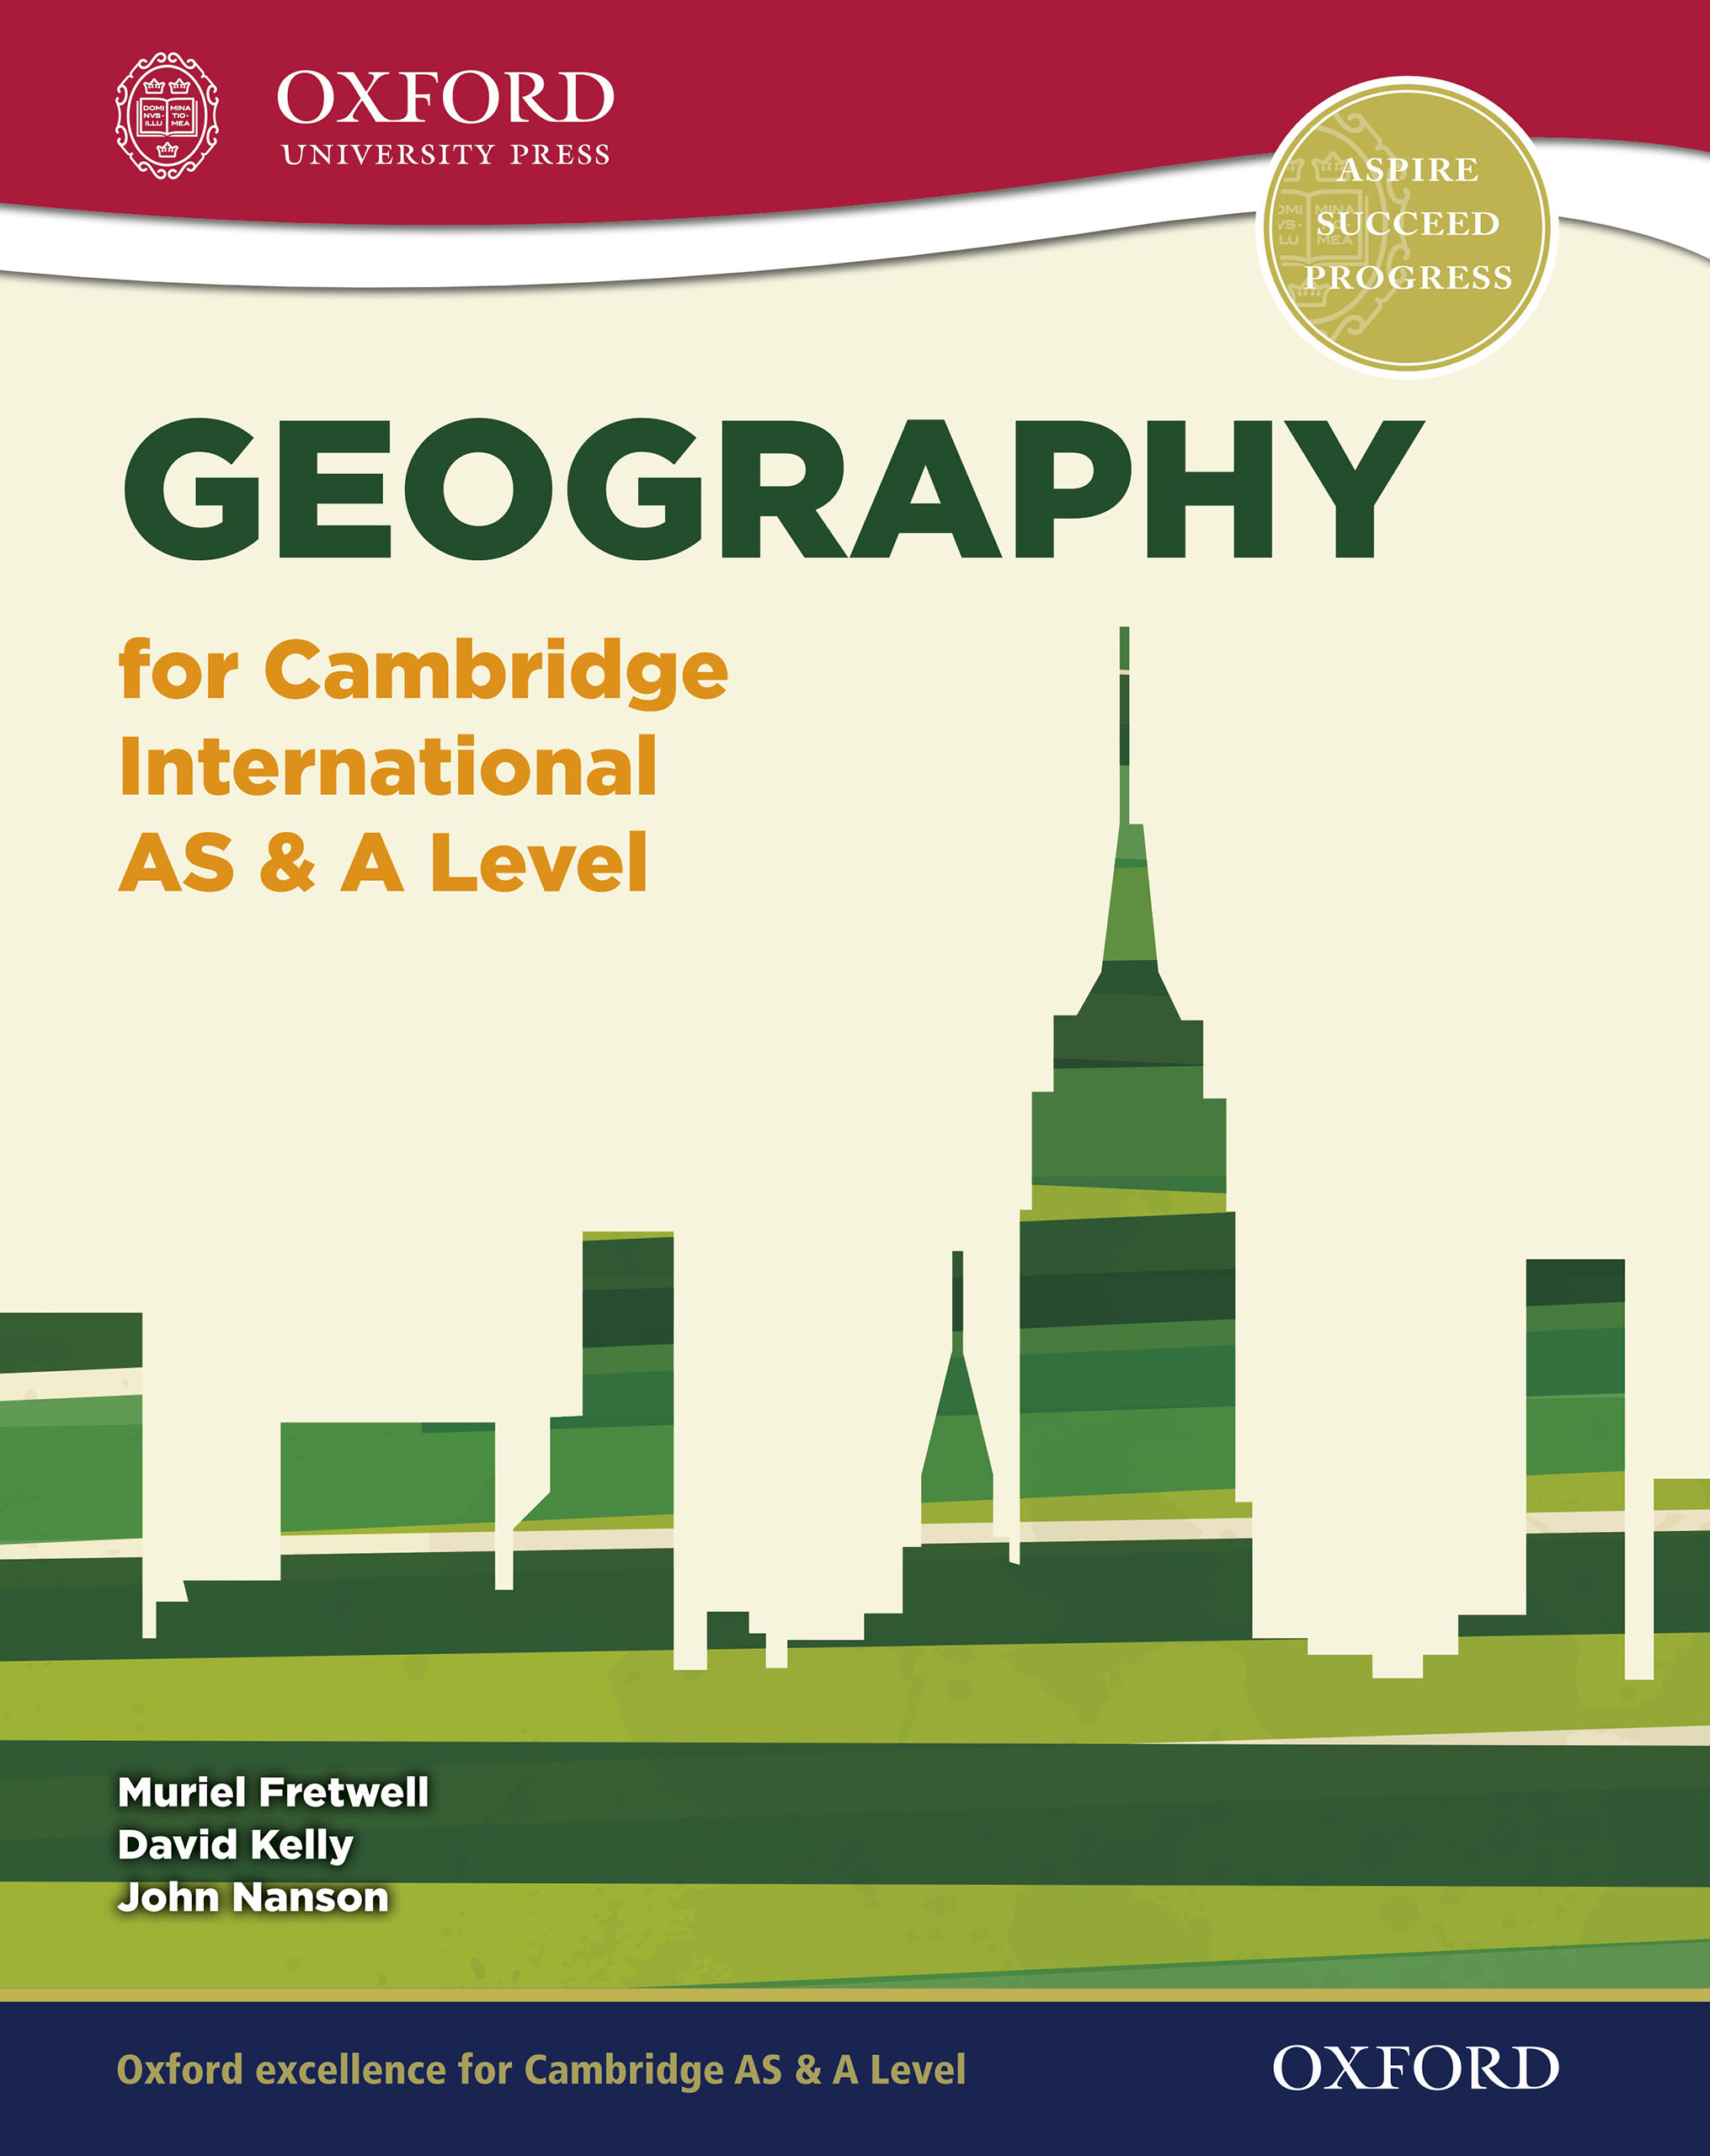 a level geography book pdf free download